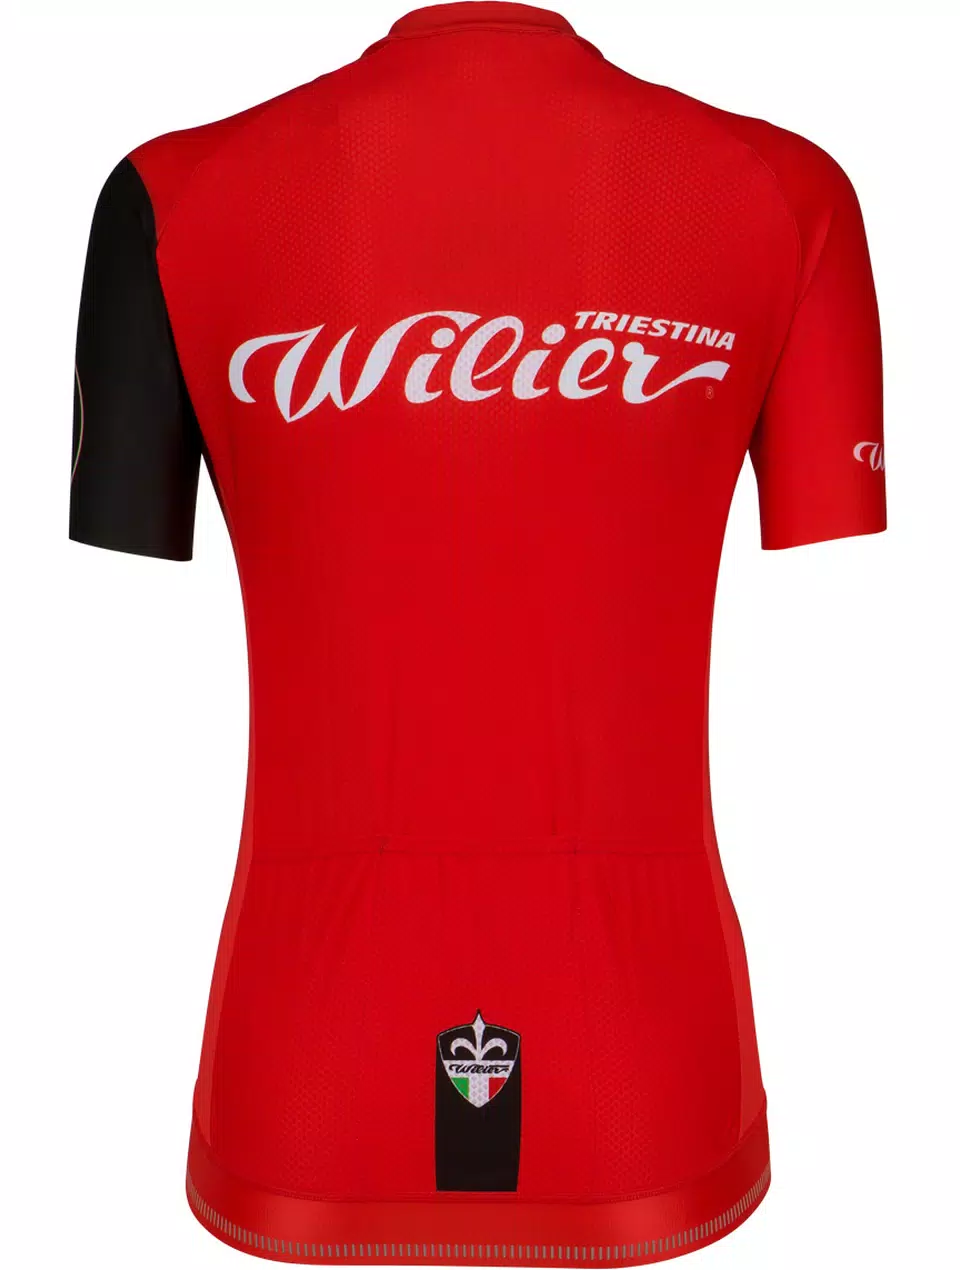 Maglia donna Wilier Cycling Club rossa